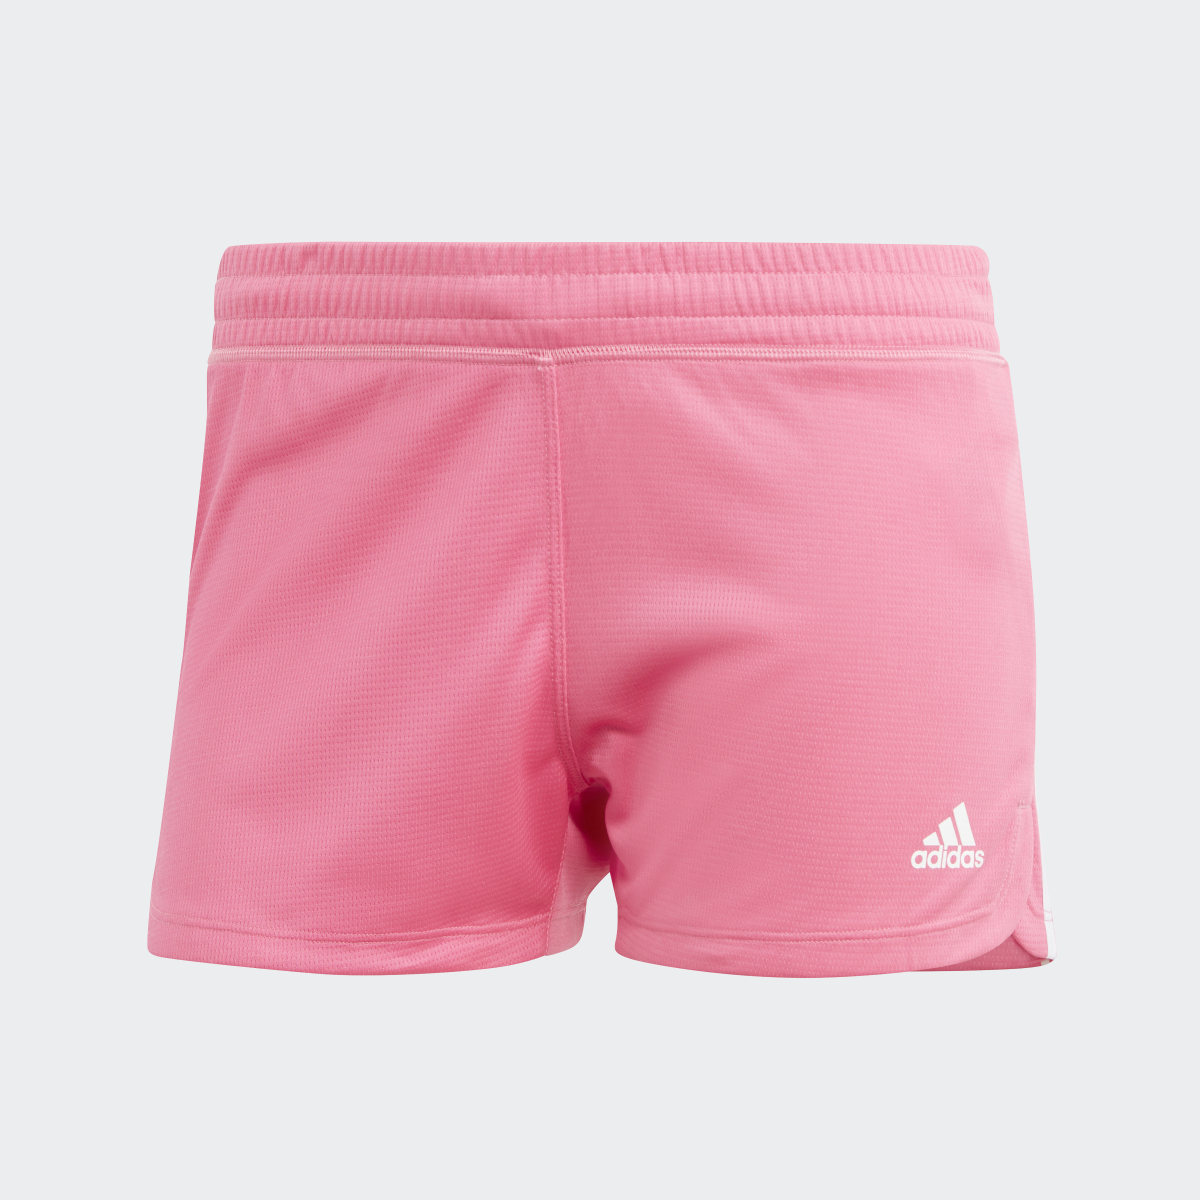 Adidas Pacer 3-Stripes Knit Shorts. 4